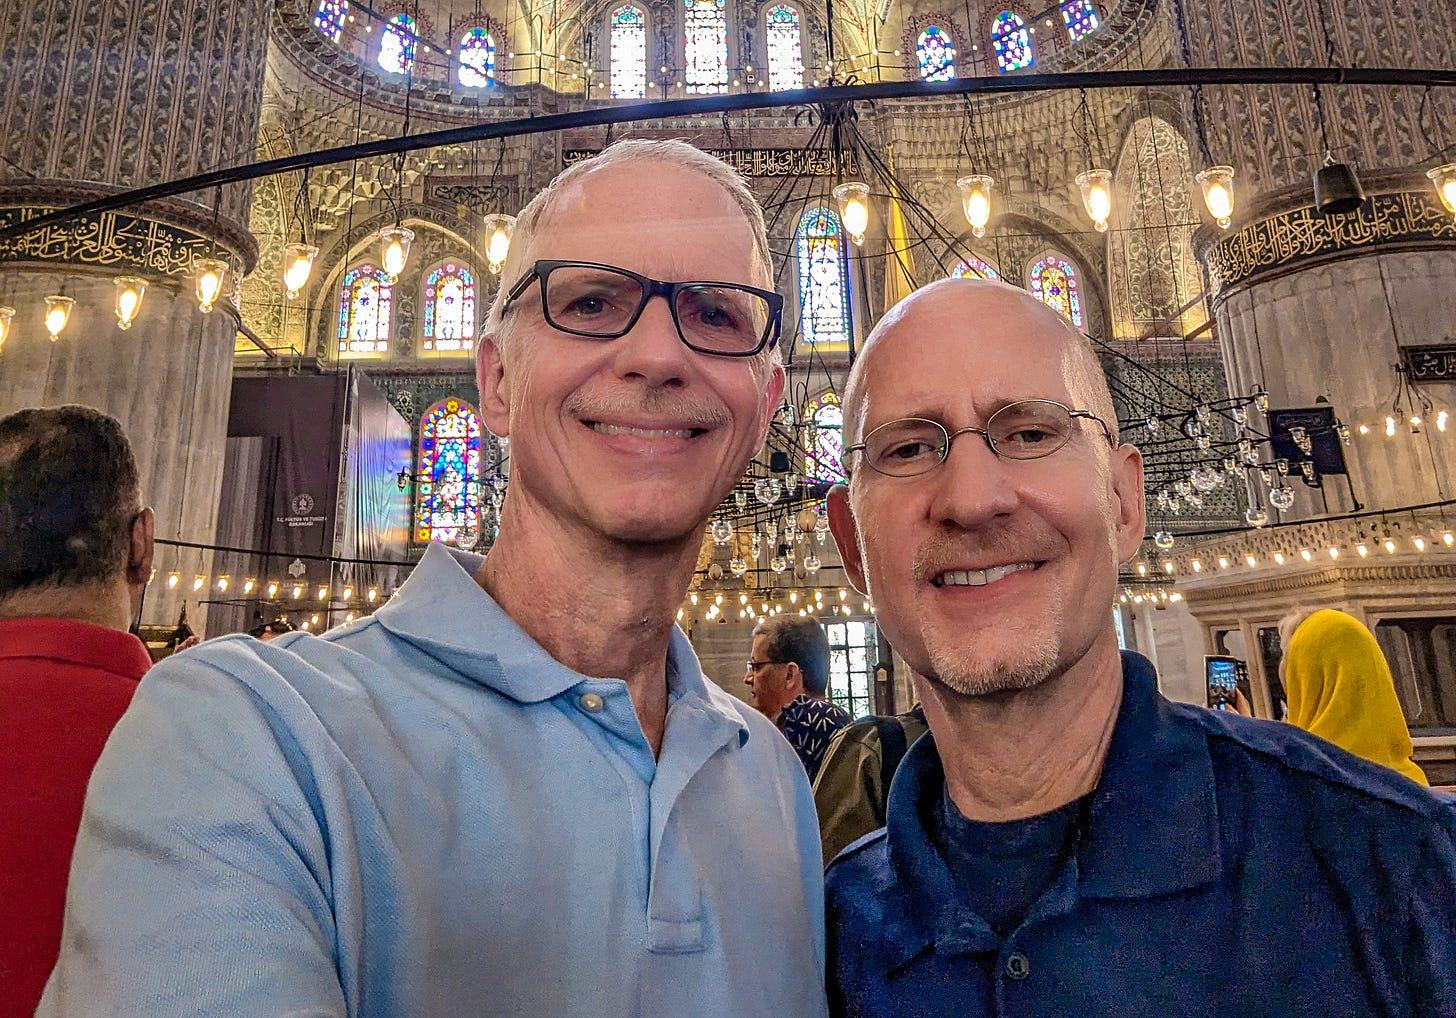 Brent and Michael inside the Blue Mosque